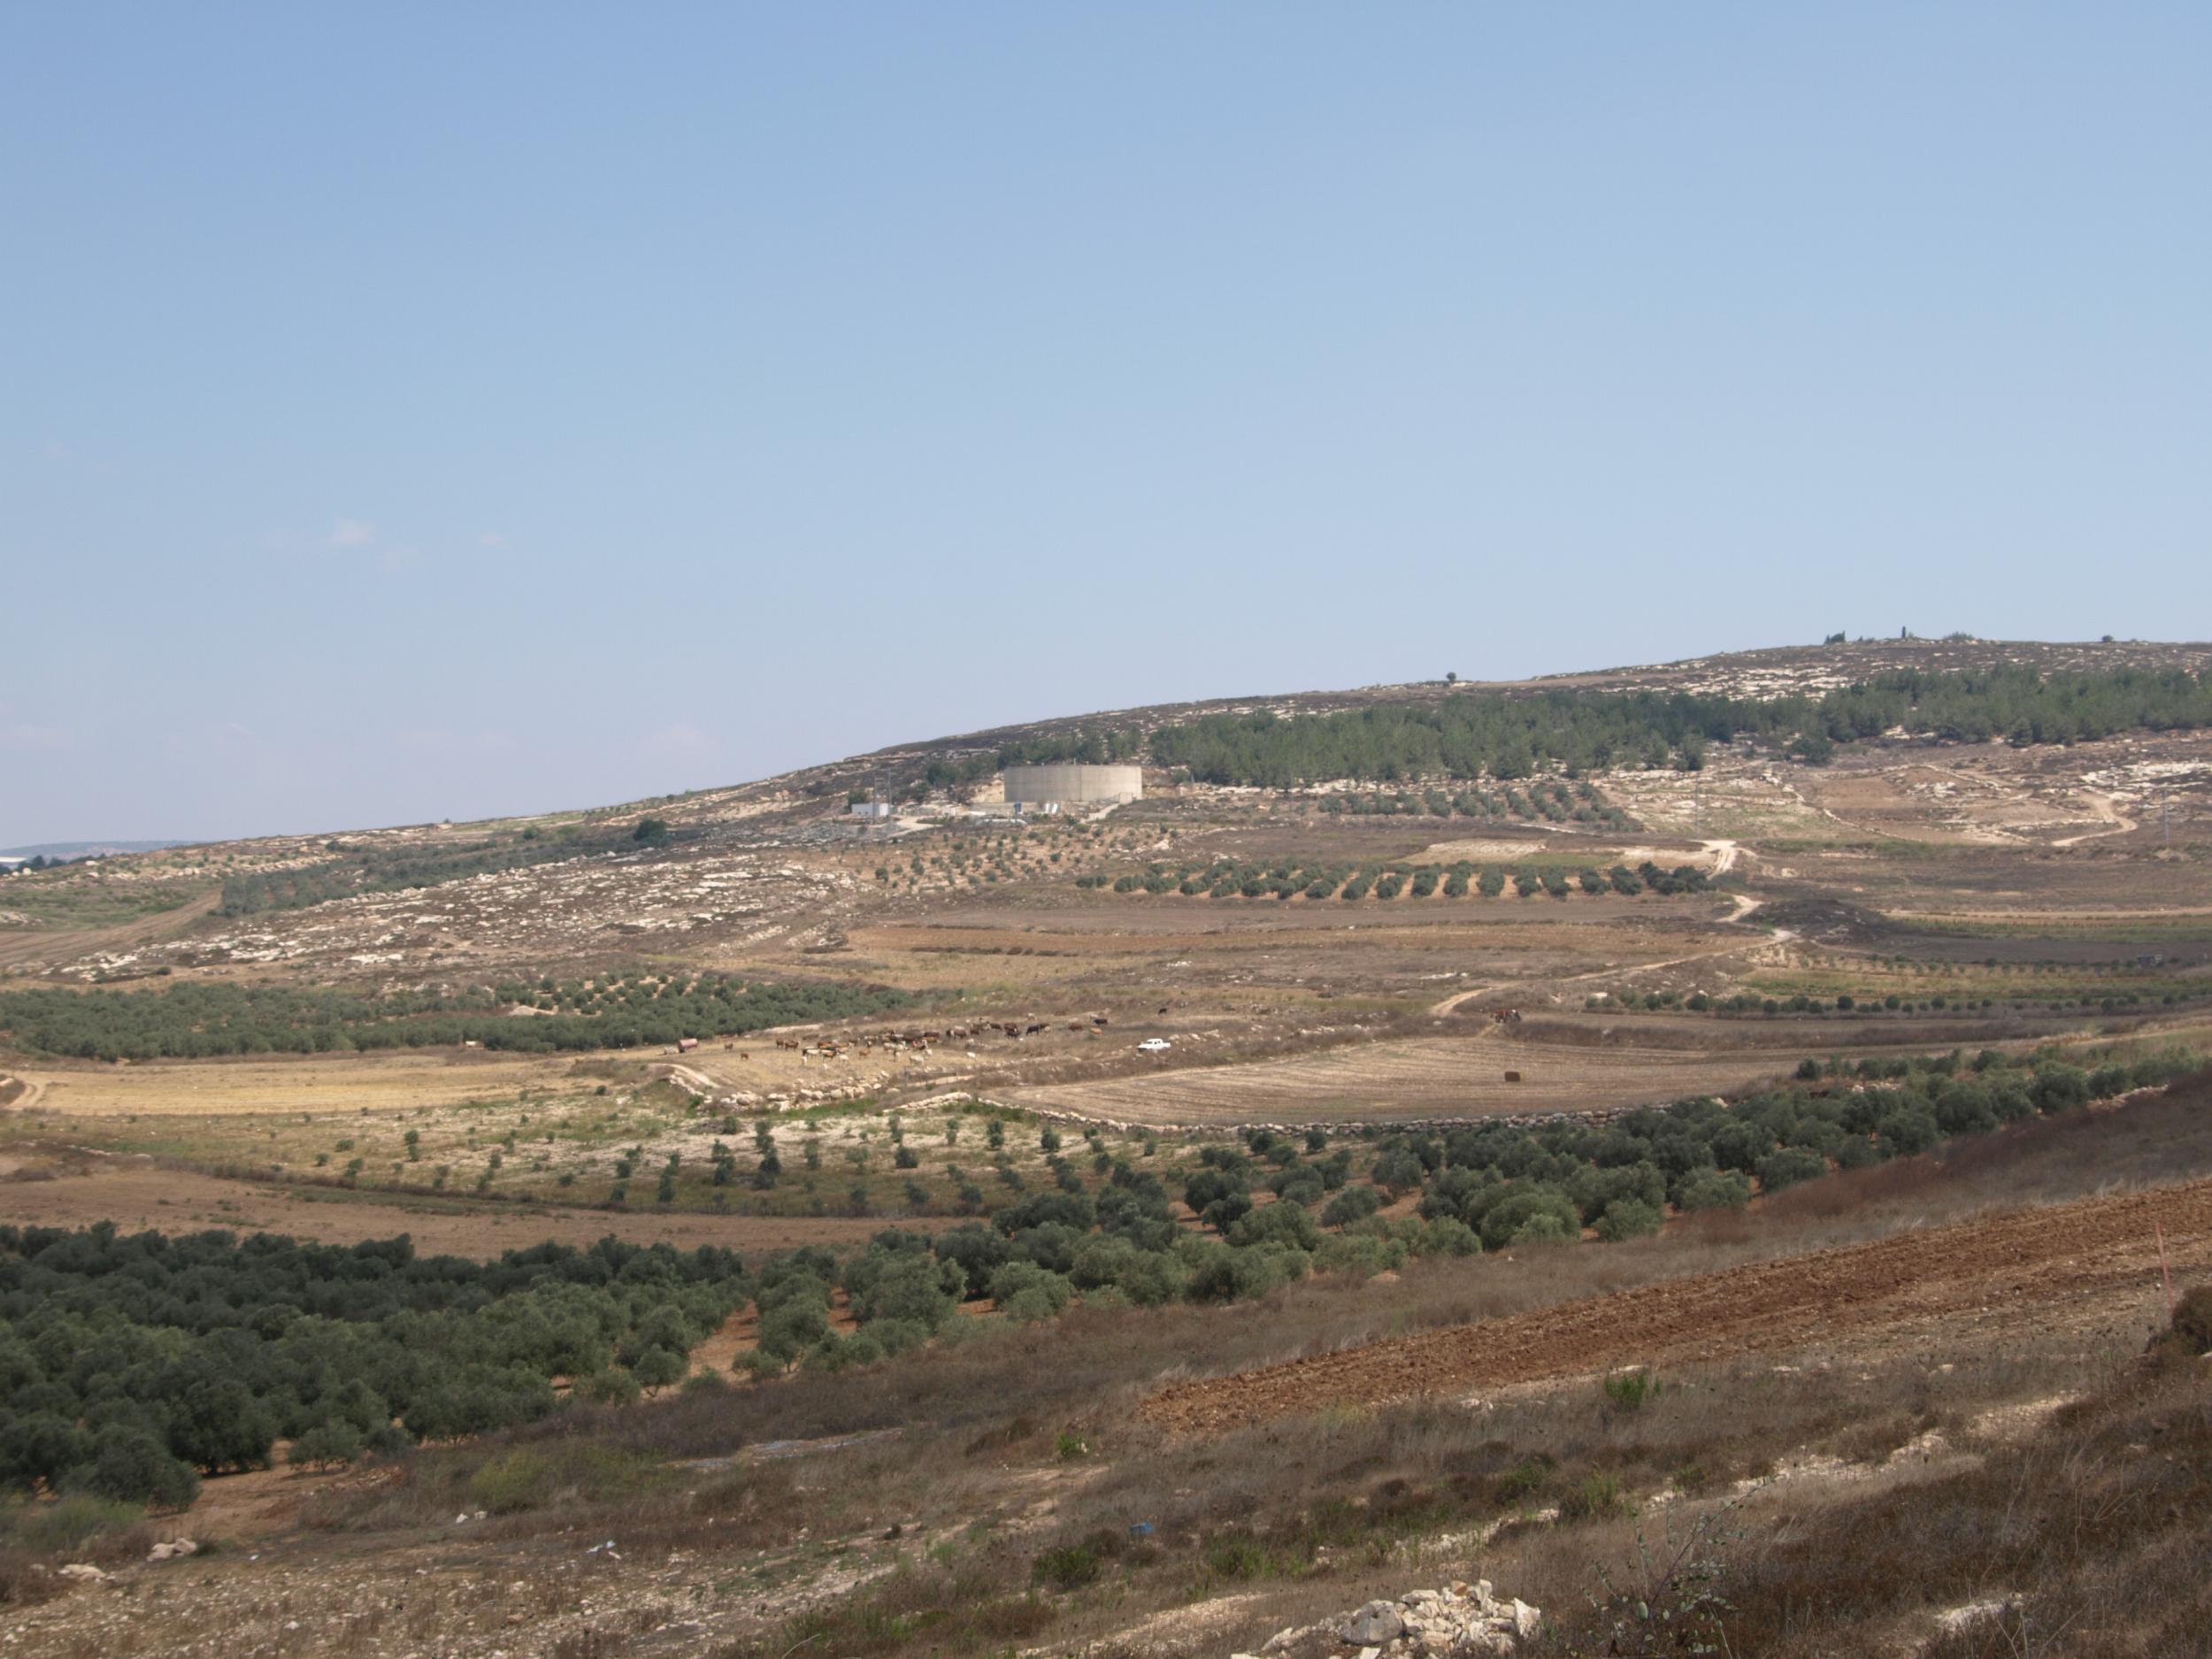 The ancient agricultural land near Nazareth where the archaeologists carried out their crucial landscape-survey work